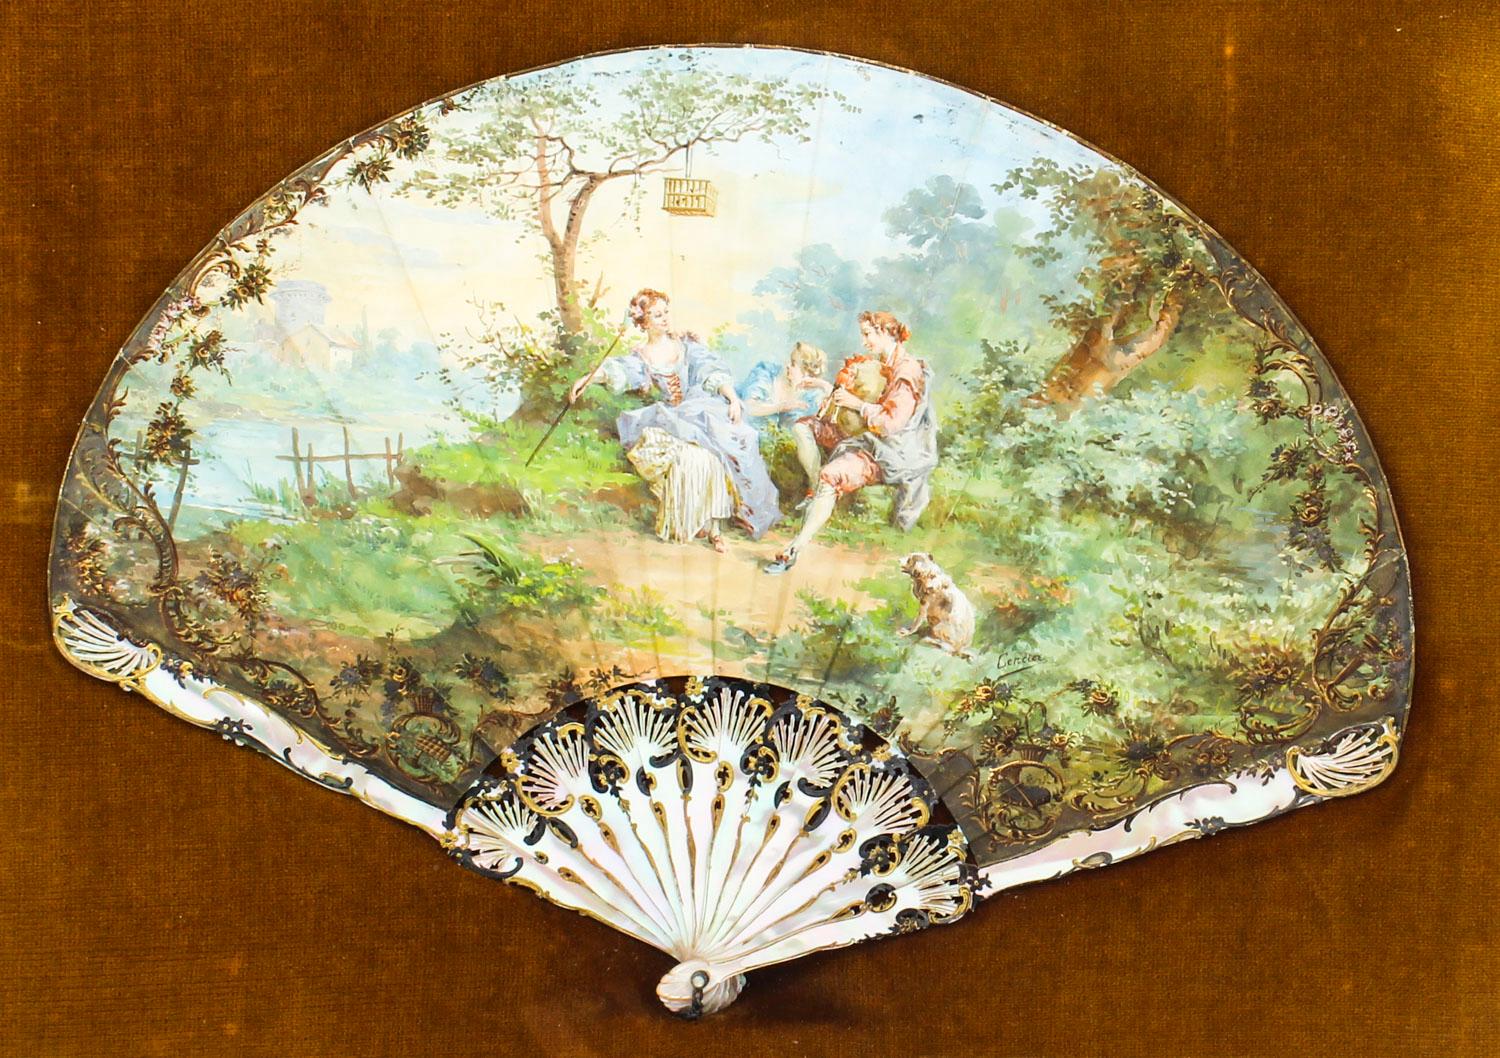 This is a beautiful decorative antique French mother of pearl fan, signed Cercier, set in a glazed giltwood frame dating from the late 18th century.

The fan is beautifully hand painted with figures at leisure against a landscape, on richly gilt